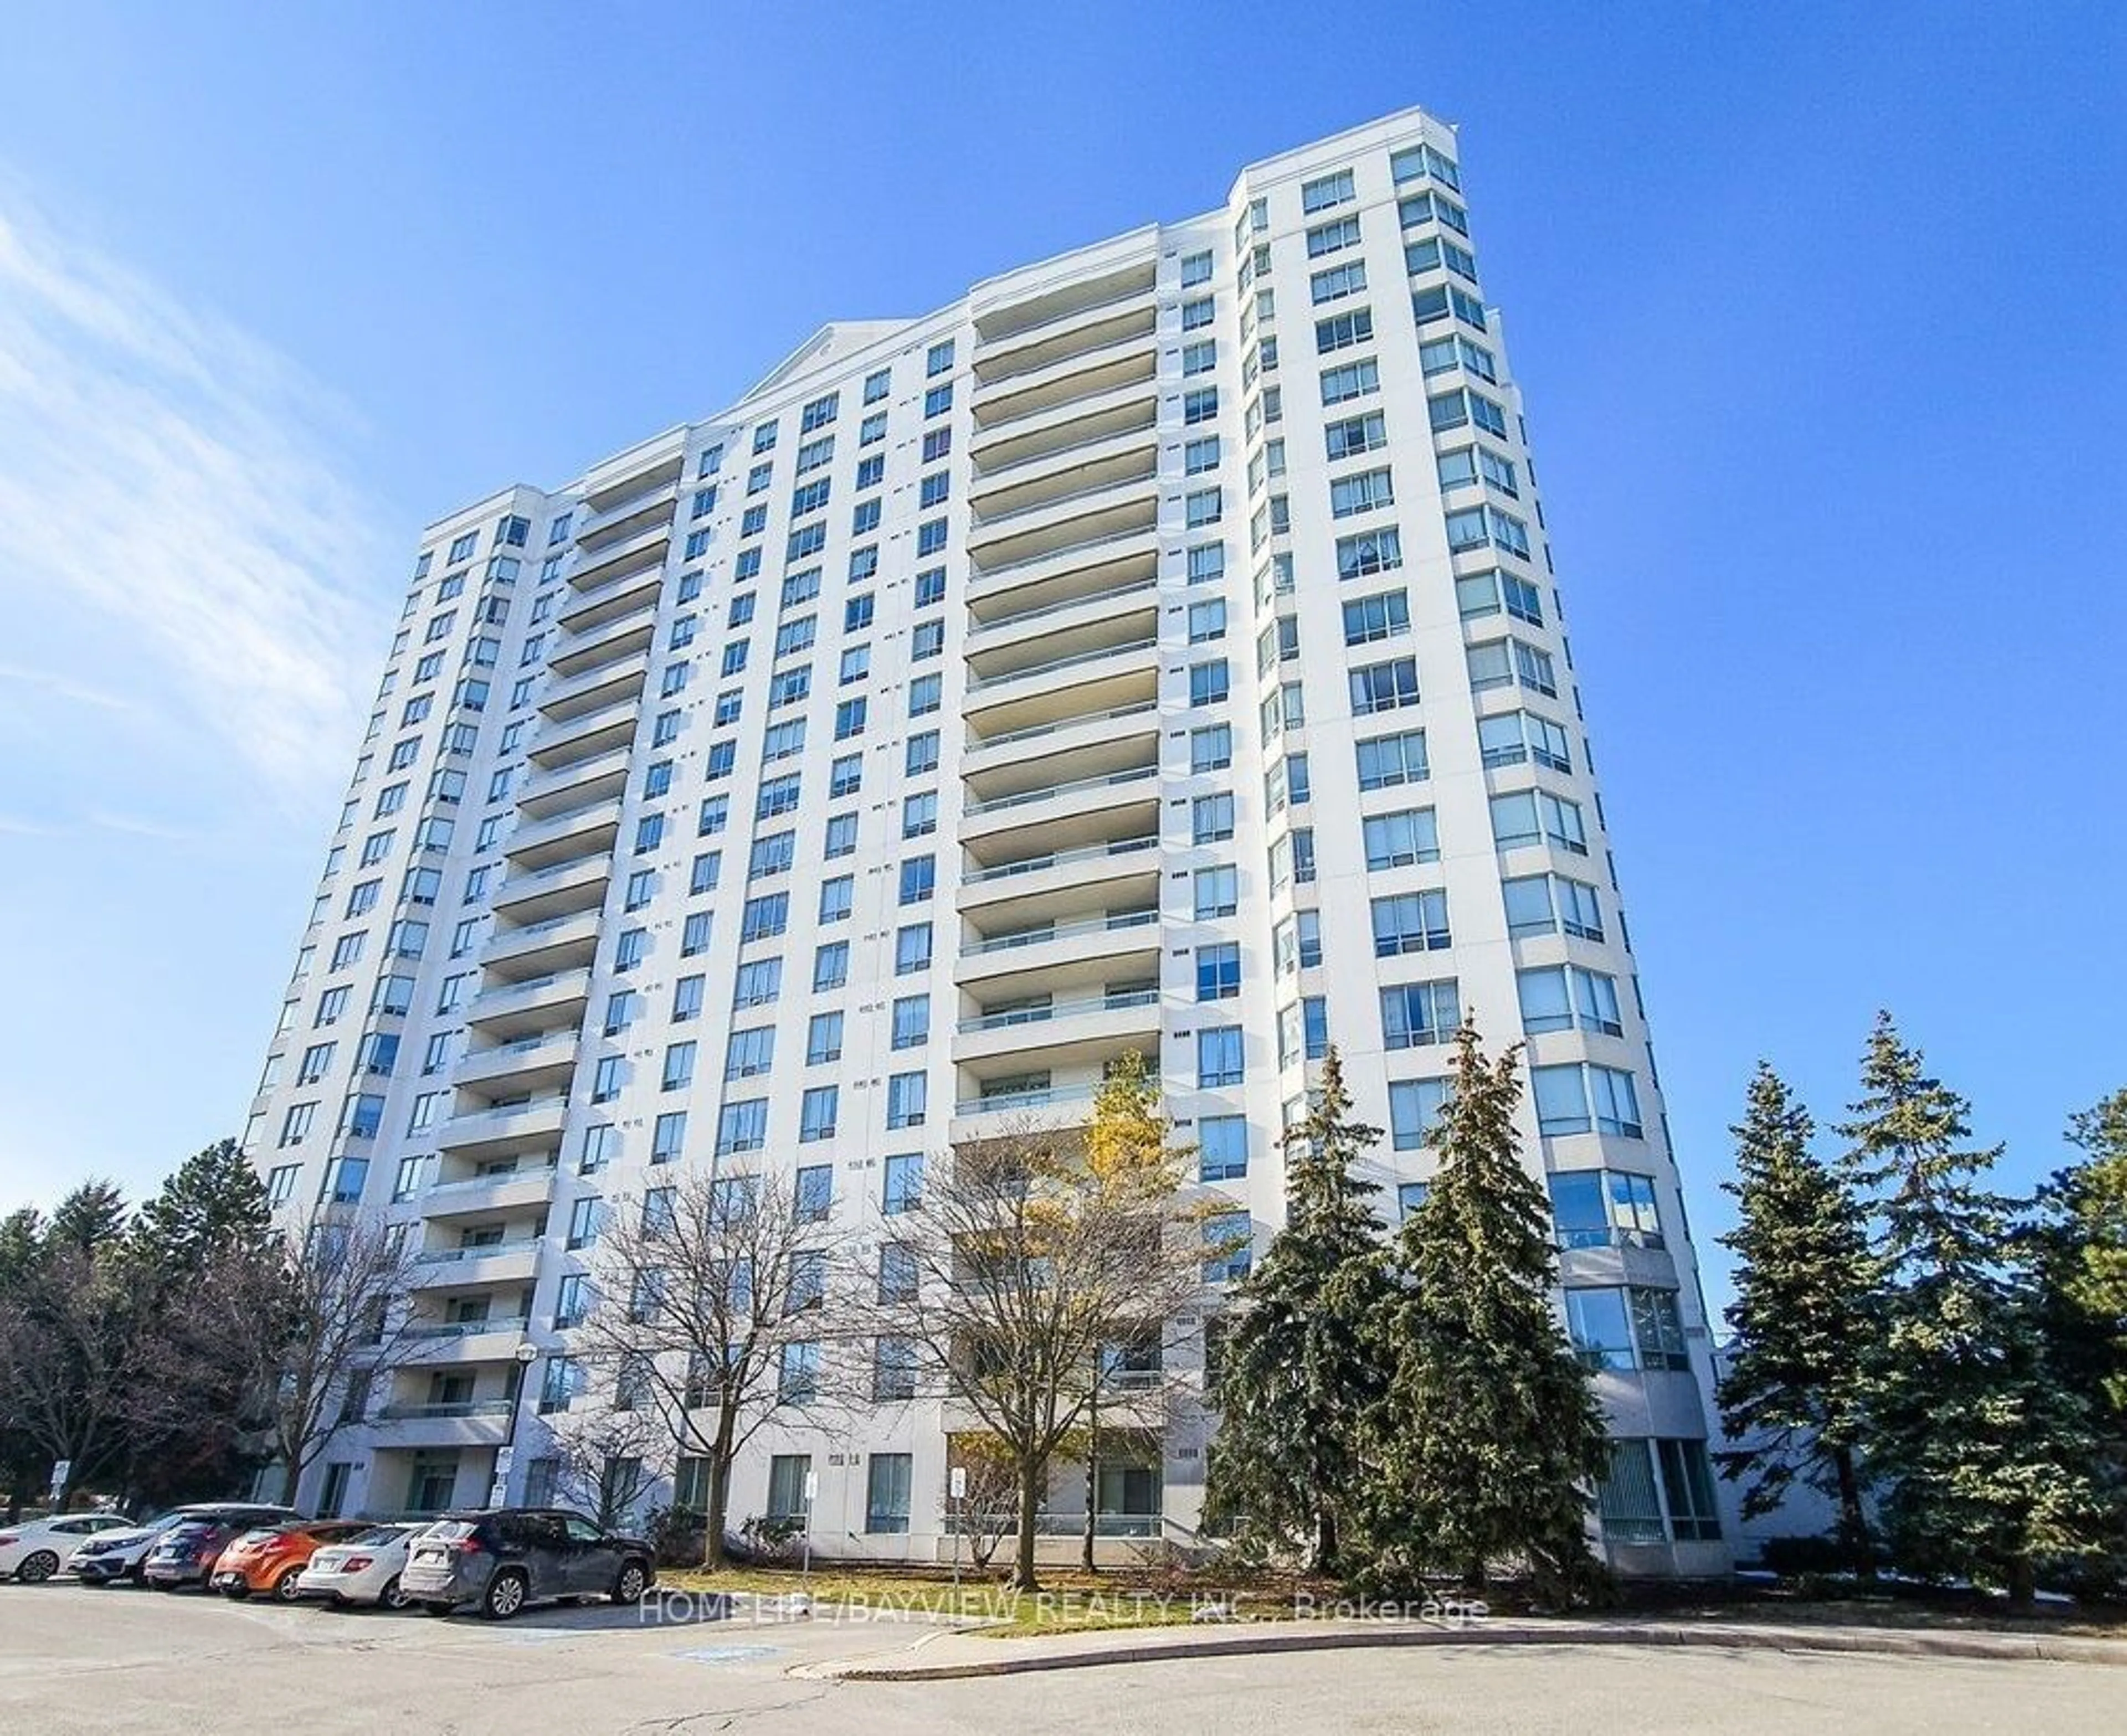 A pic from exterior of the house or condo for 5001 Finch Ave #202, Toronto Ontario M1S 5J9